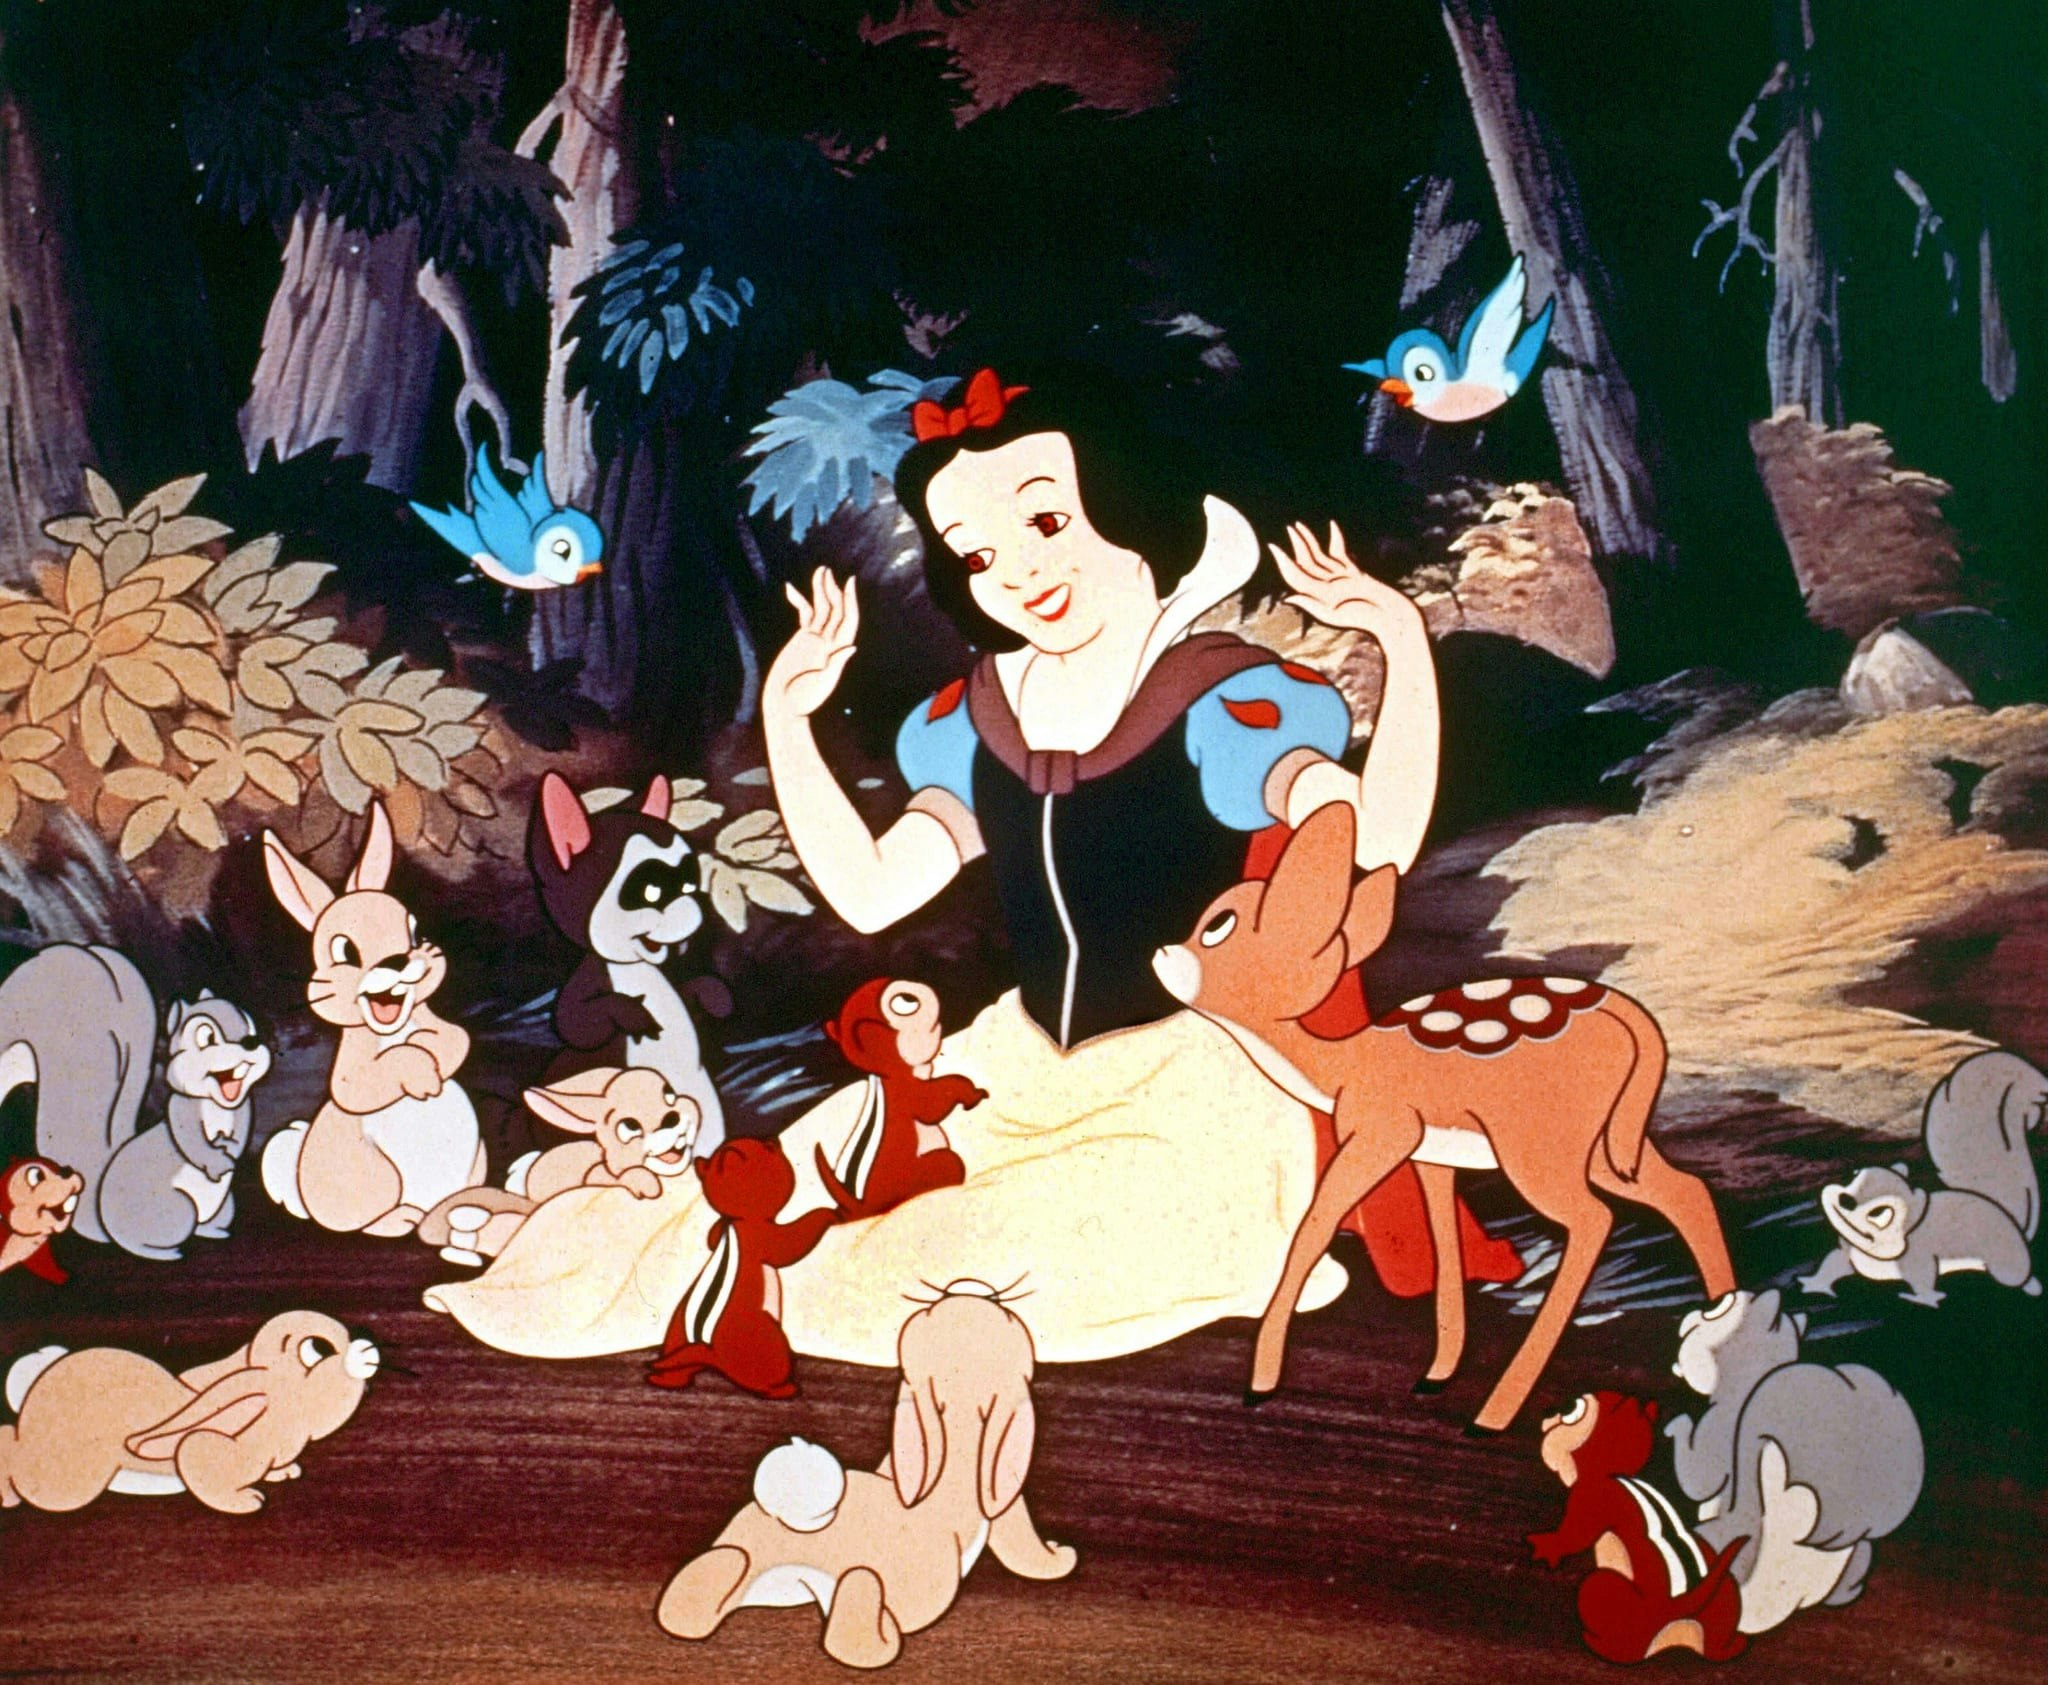 Release of the first animated feature film from Disney studios, on December 21, 1937, Snow White and the Seven Dwarfs.